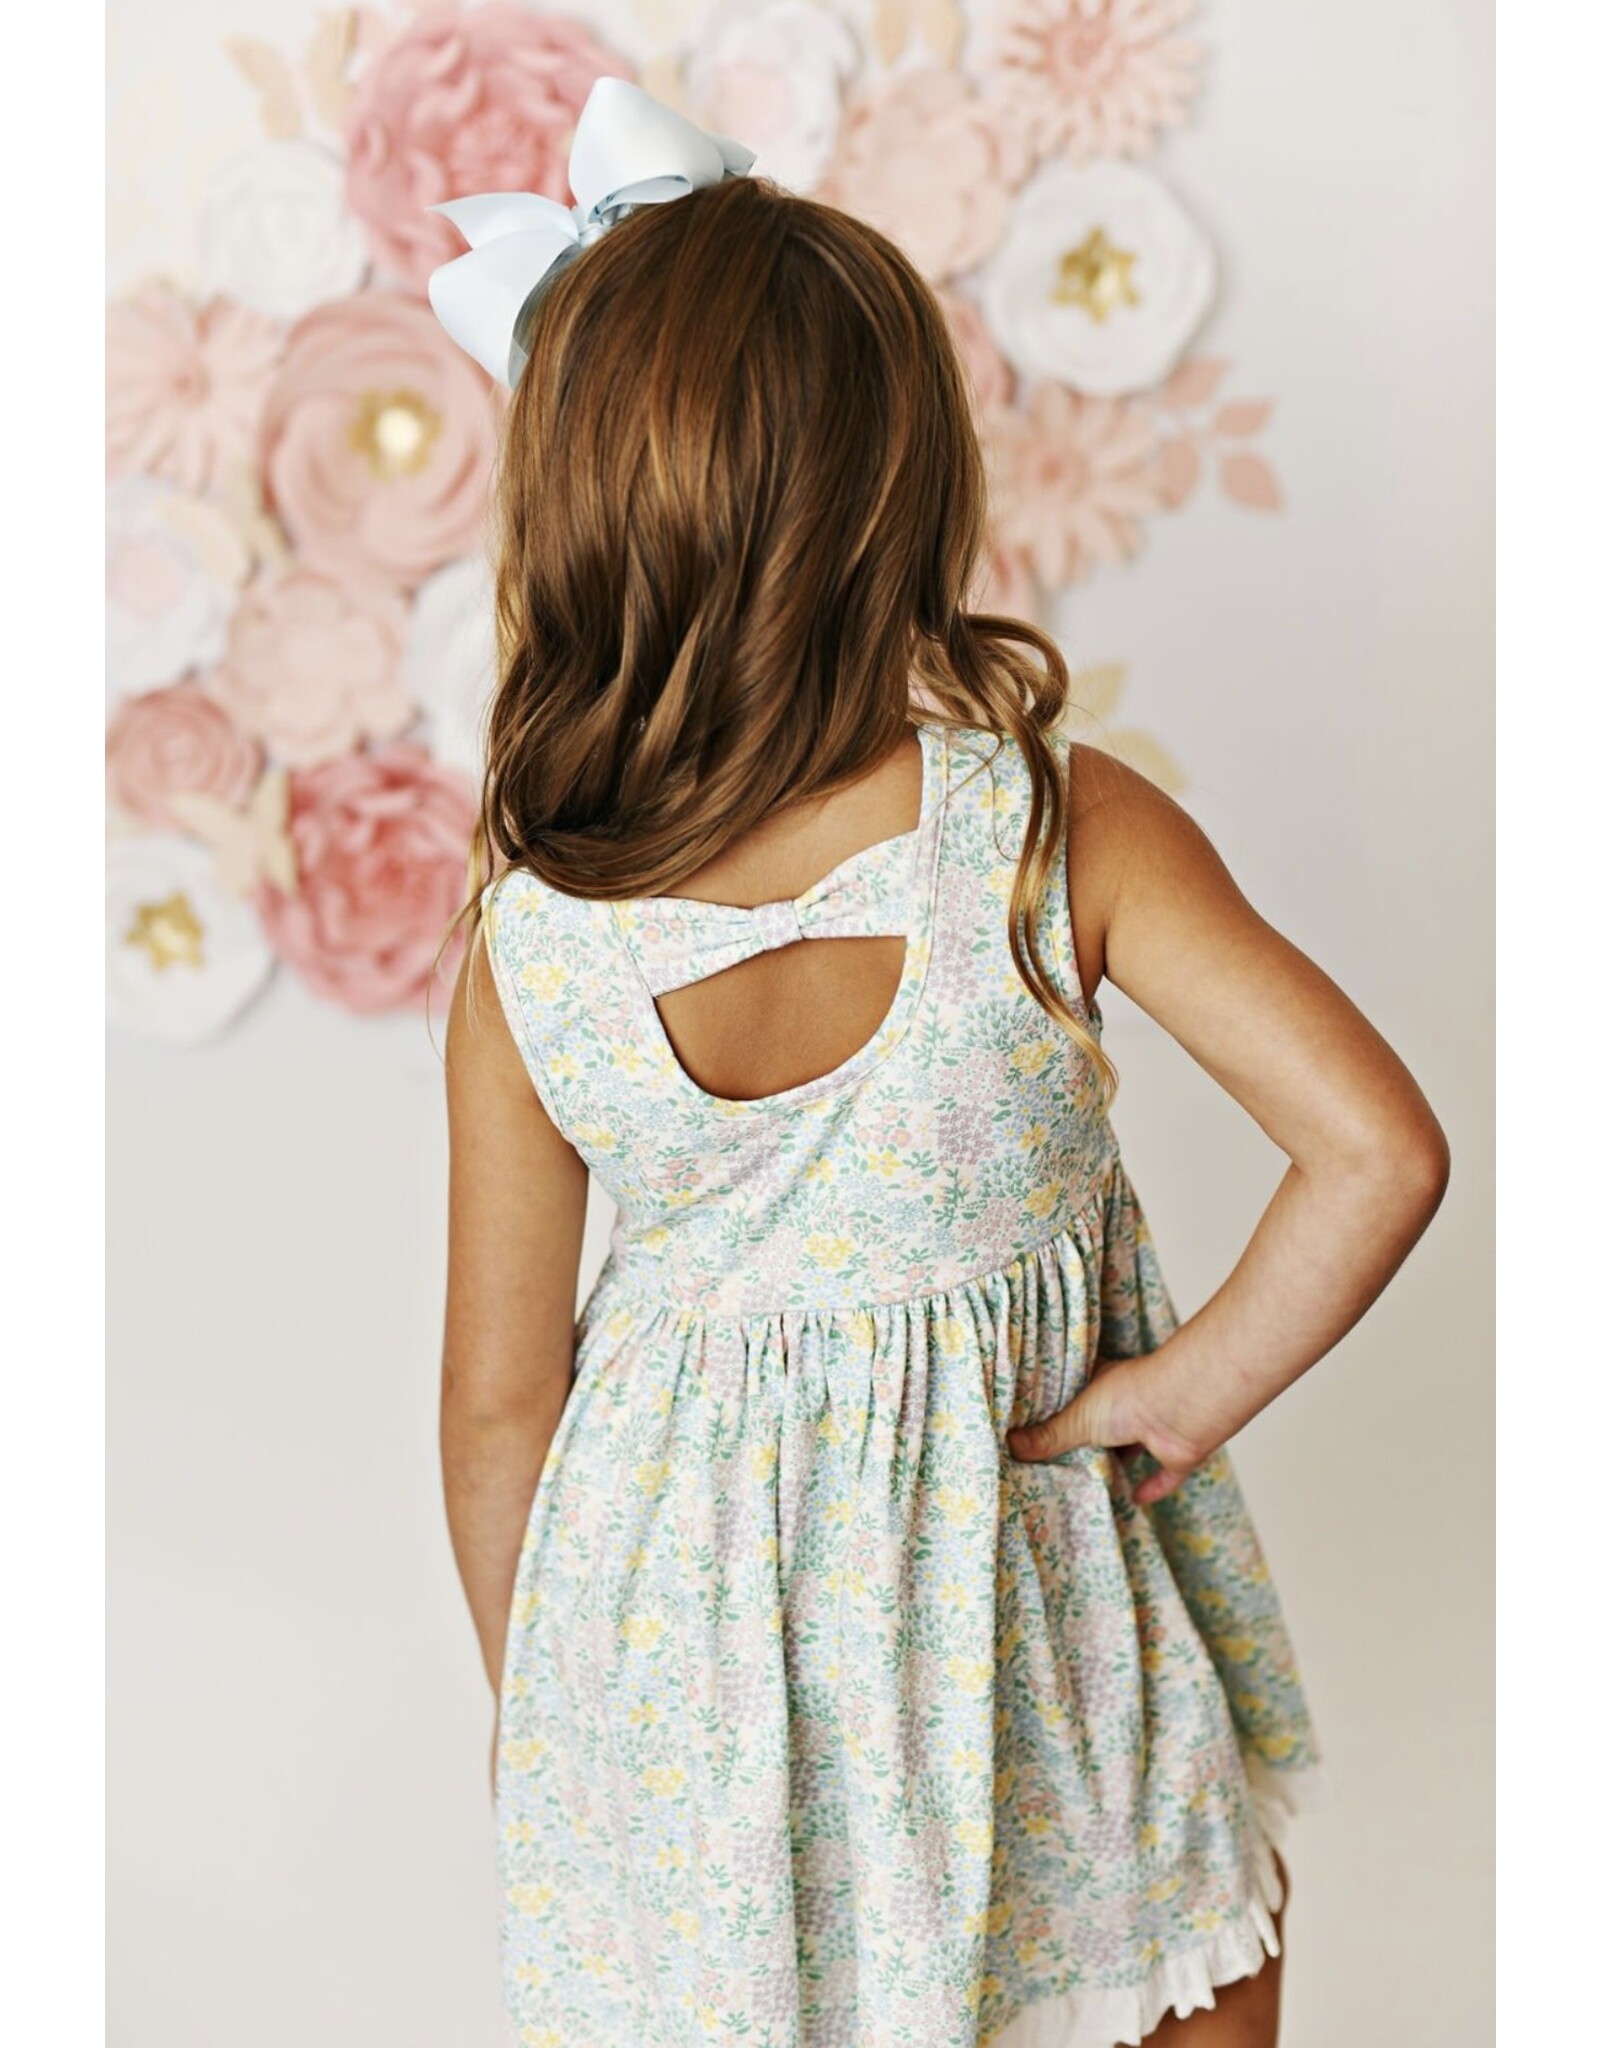 Swoon Baby Swoon Baby- Spring Ditsy Floral Prim Eyelet Bow Dress